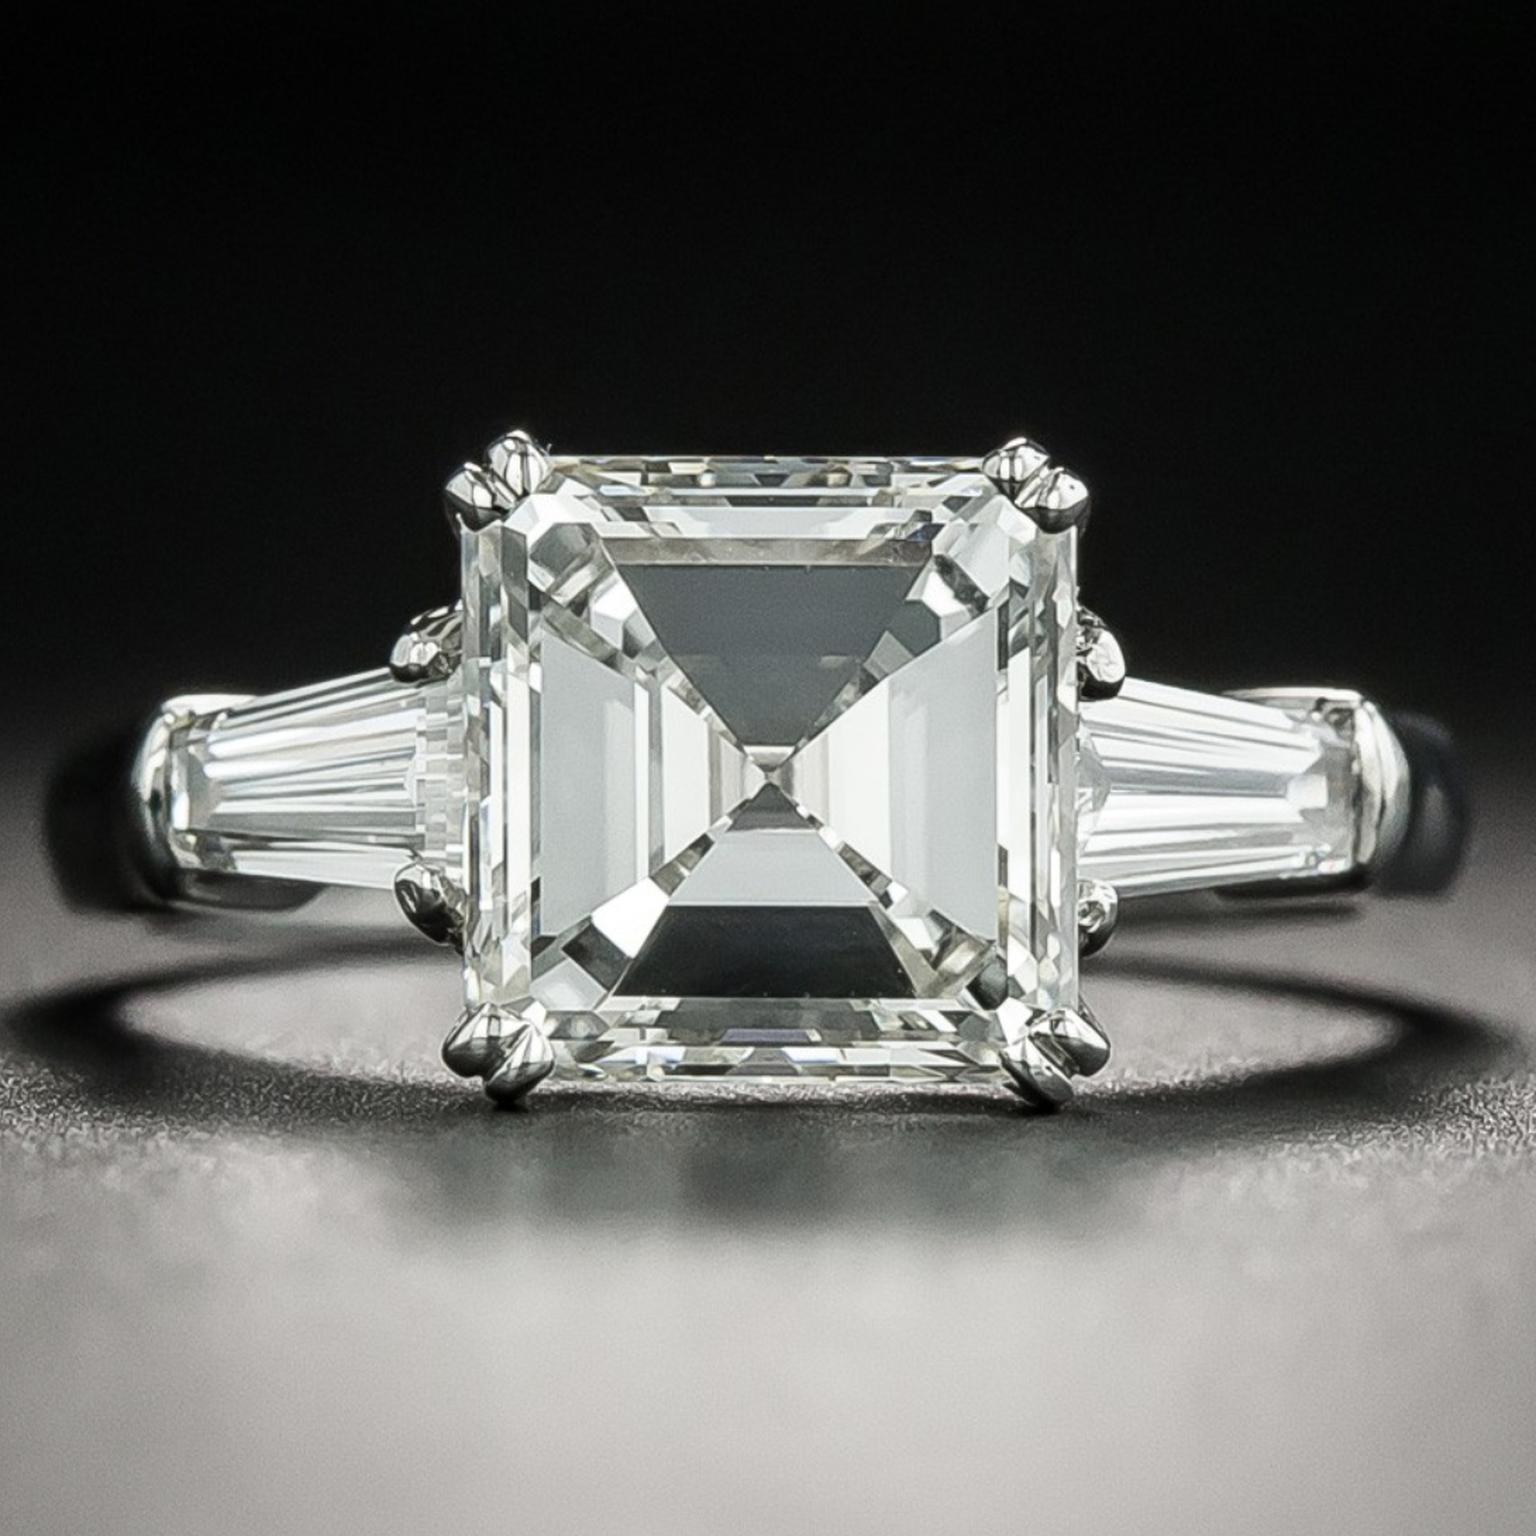 Emerald cut diamond engagement ring sold by Lang Antiques